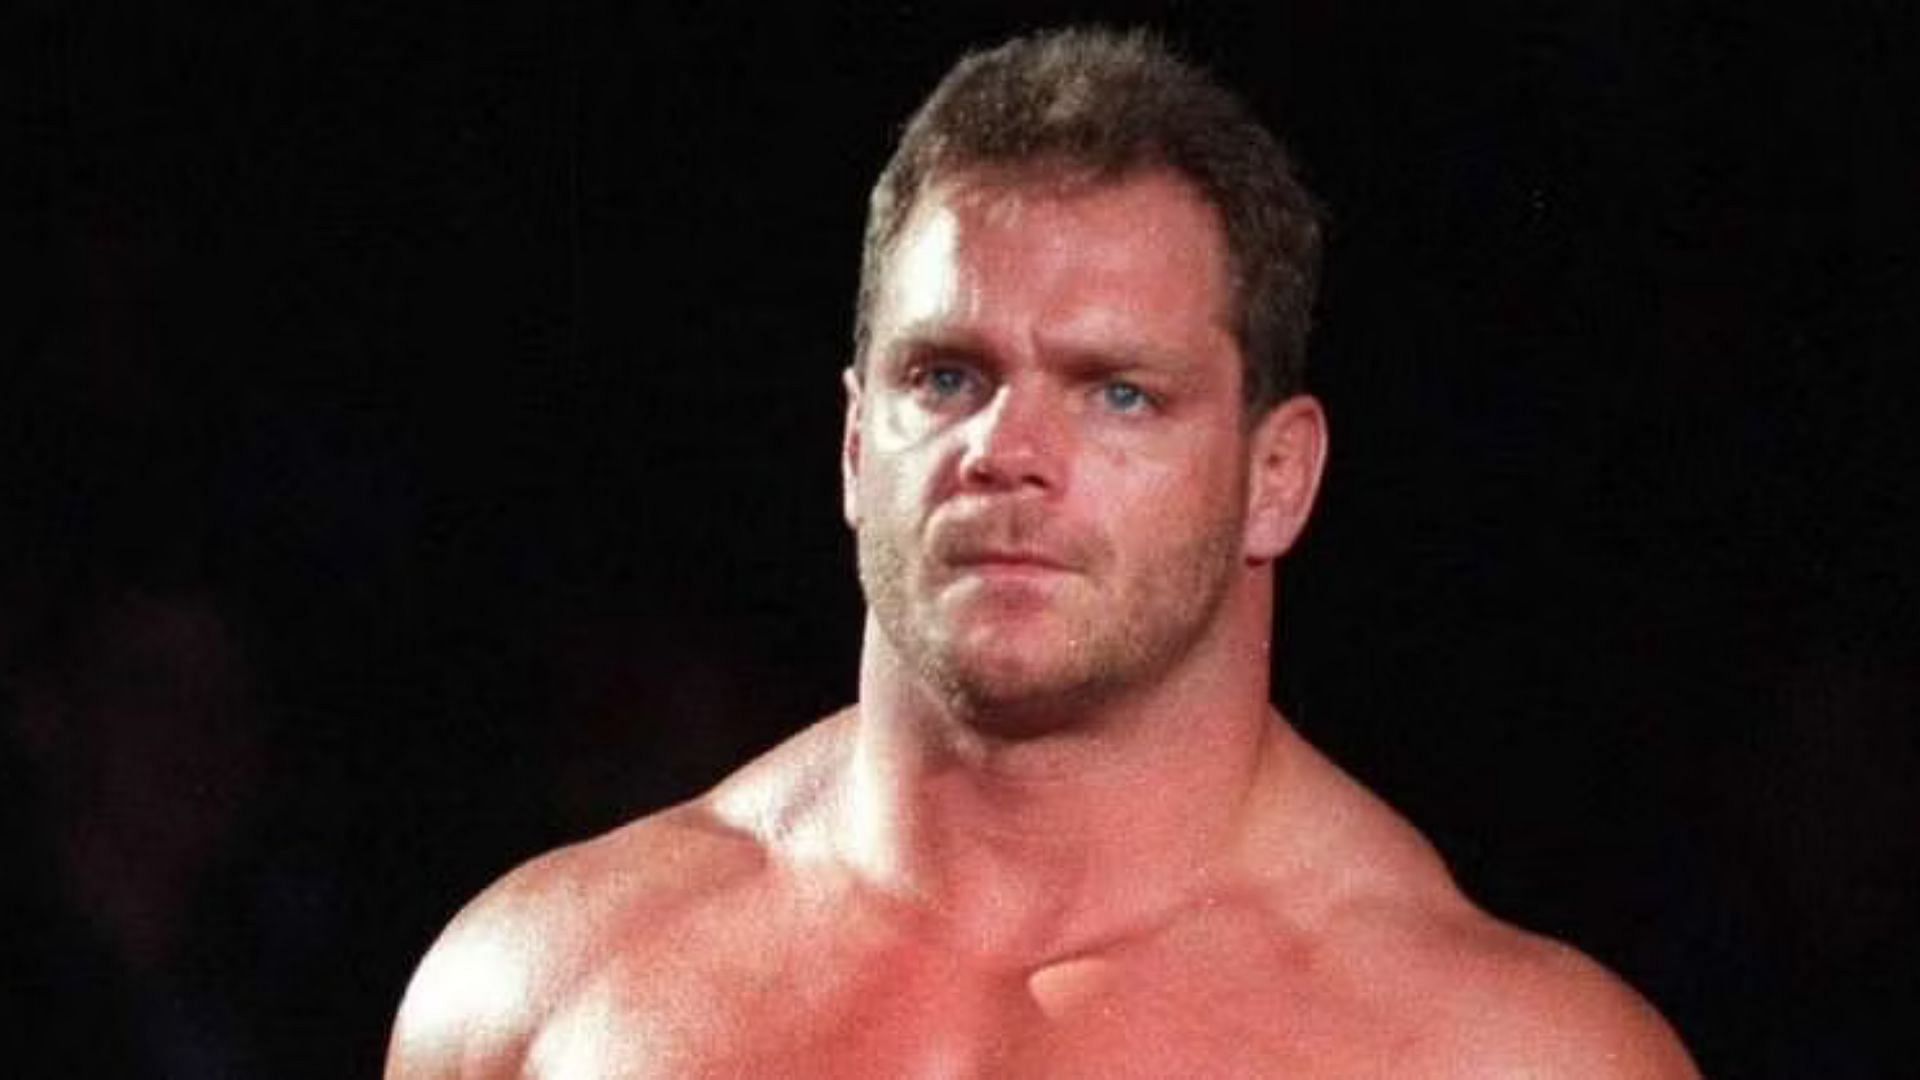 Chris Benoit wrestled for 22 years in several companies.